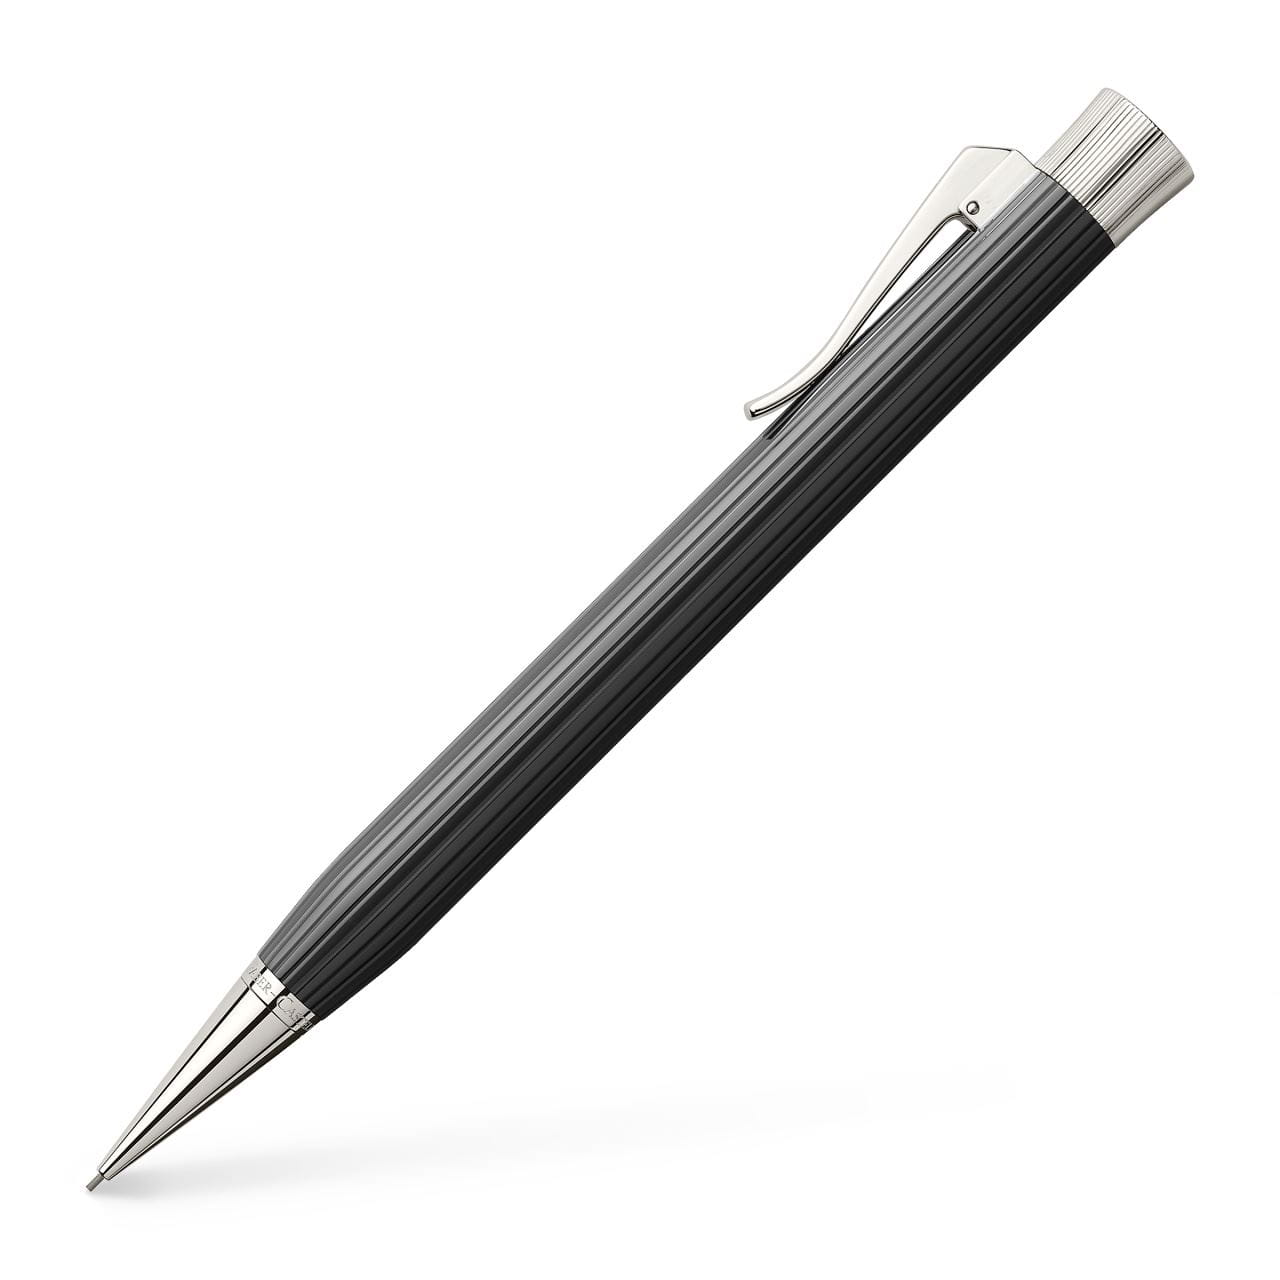 Graf-von-Faber-Castell - Propelling pencil Intuition Platino finely fluted, black